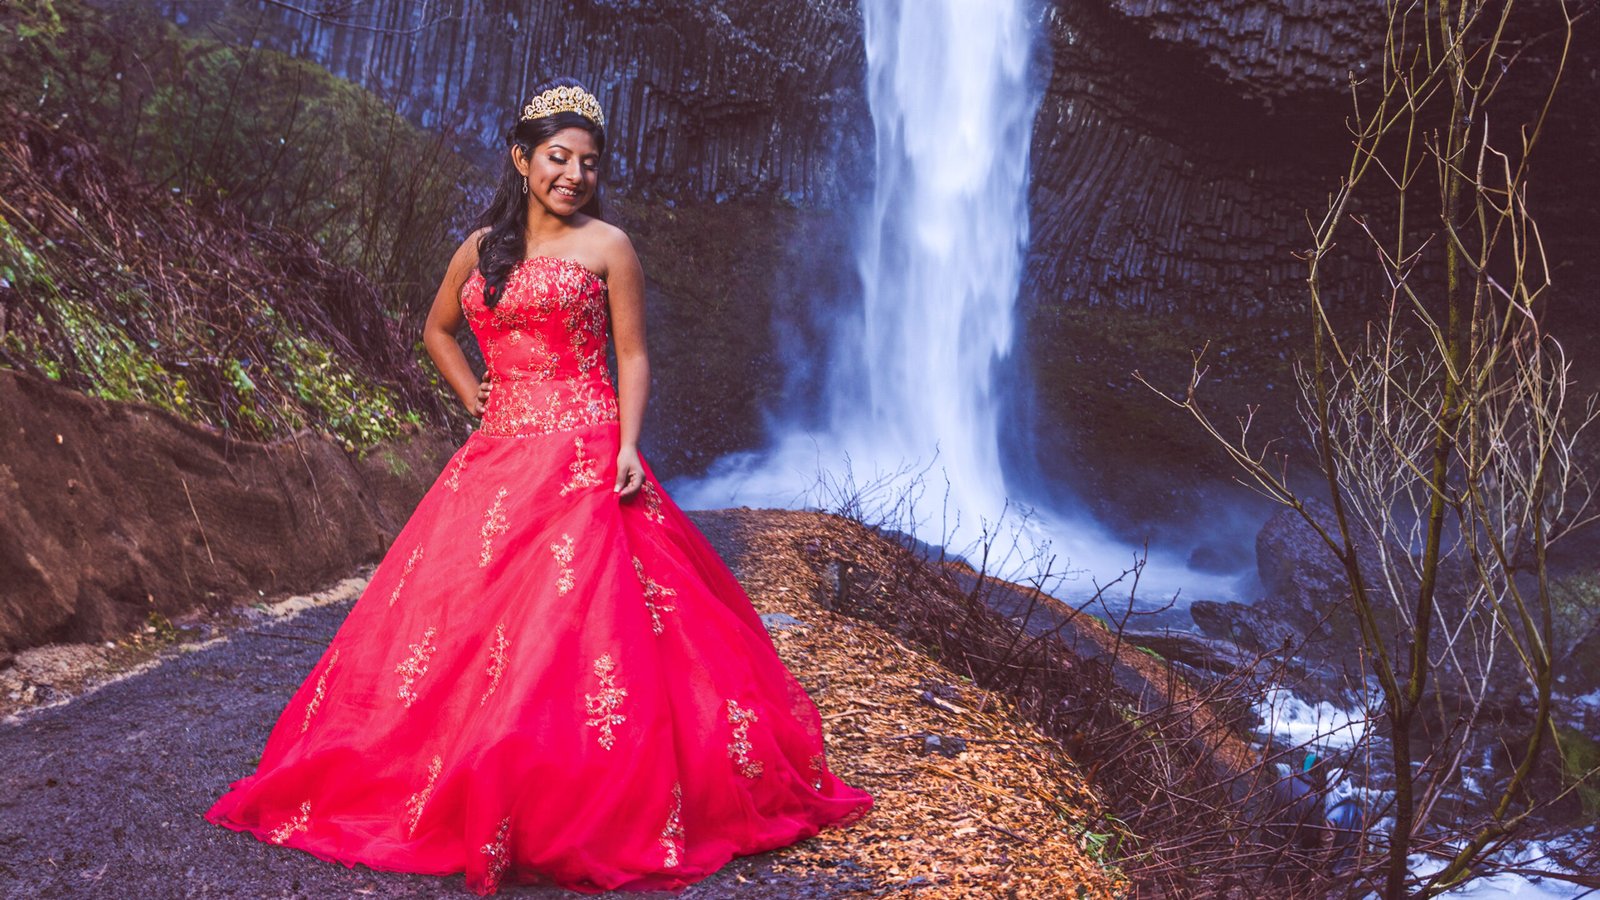 Traveling Quinceanera Photographer San Diego